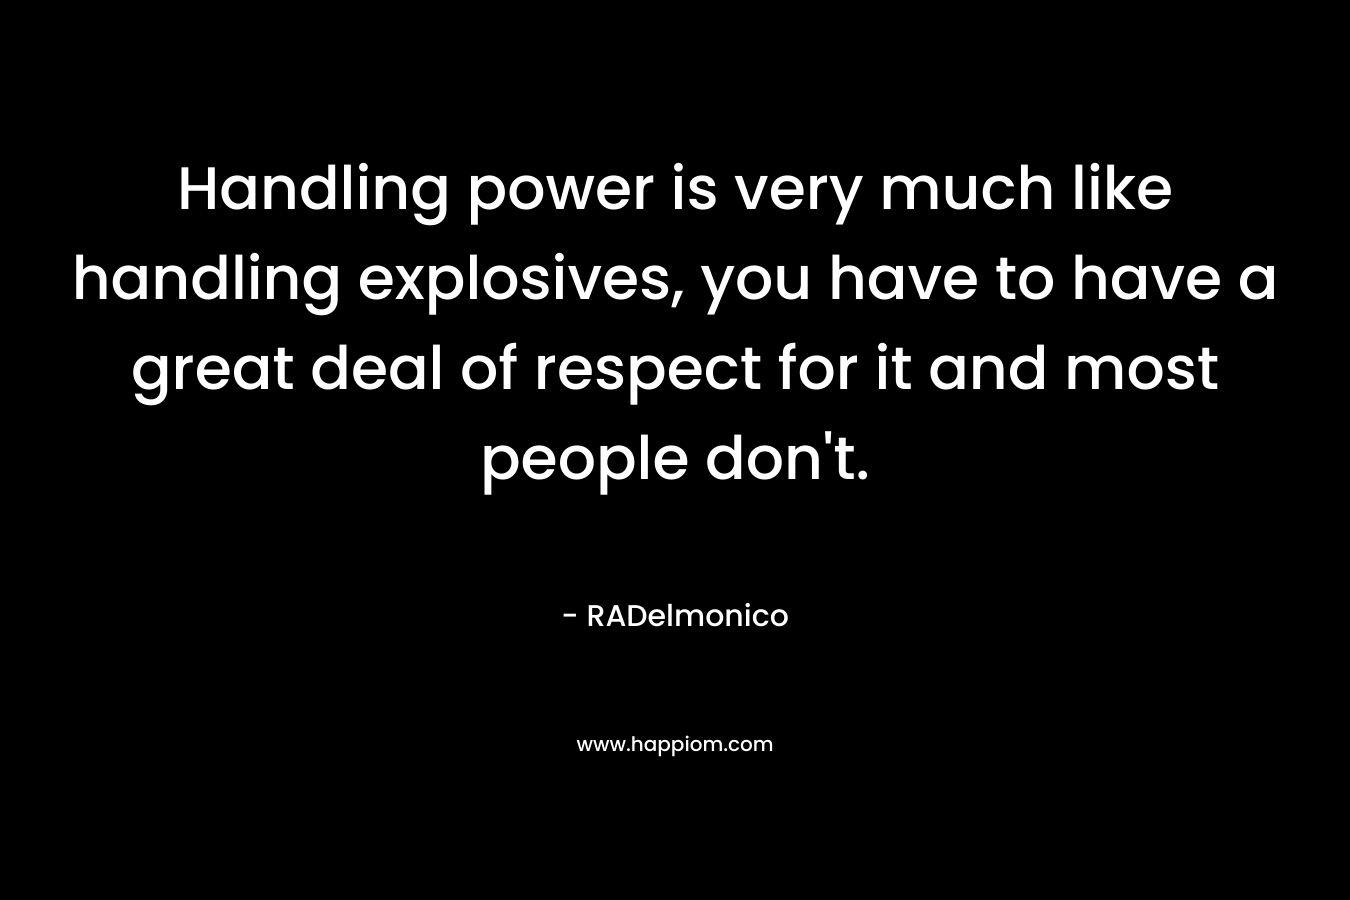 Handling power is very much like handling explosives, you have to have a great deal of respect for it and most people don't.